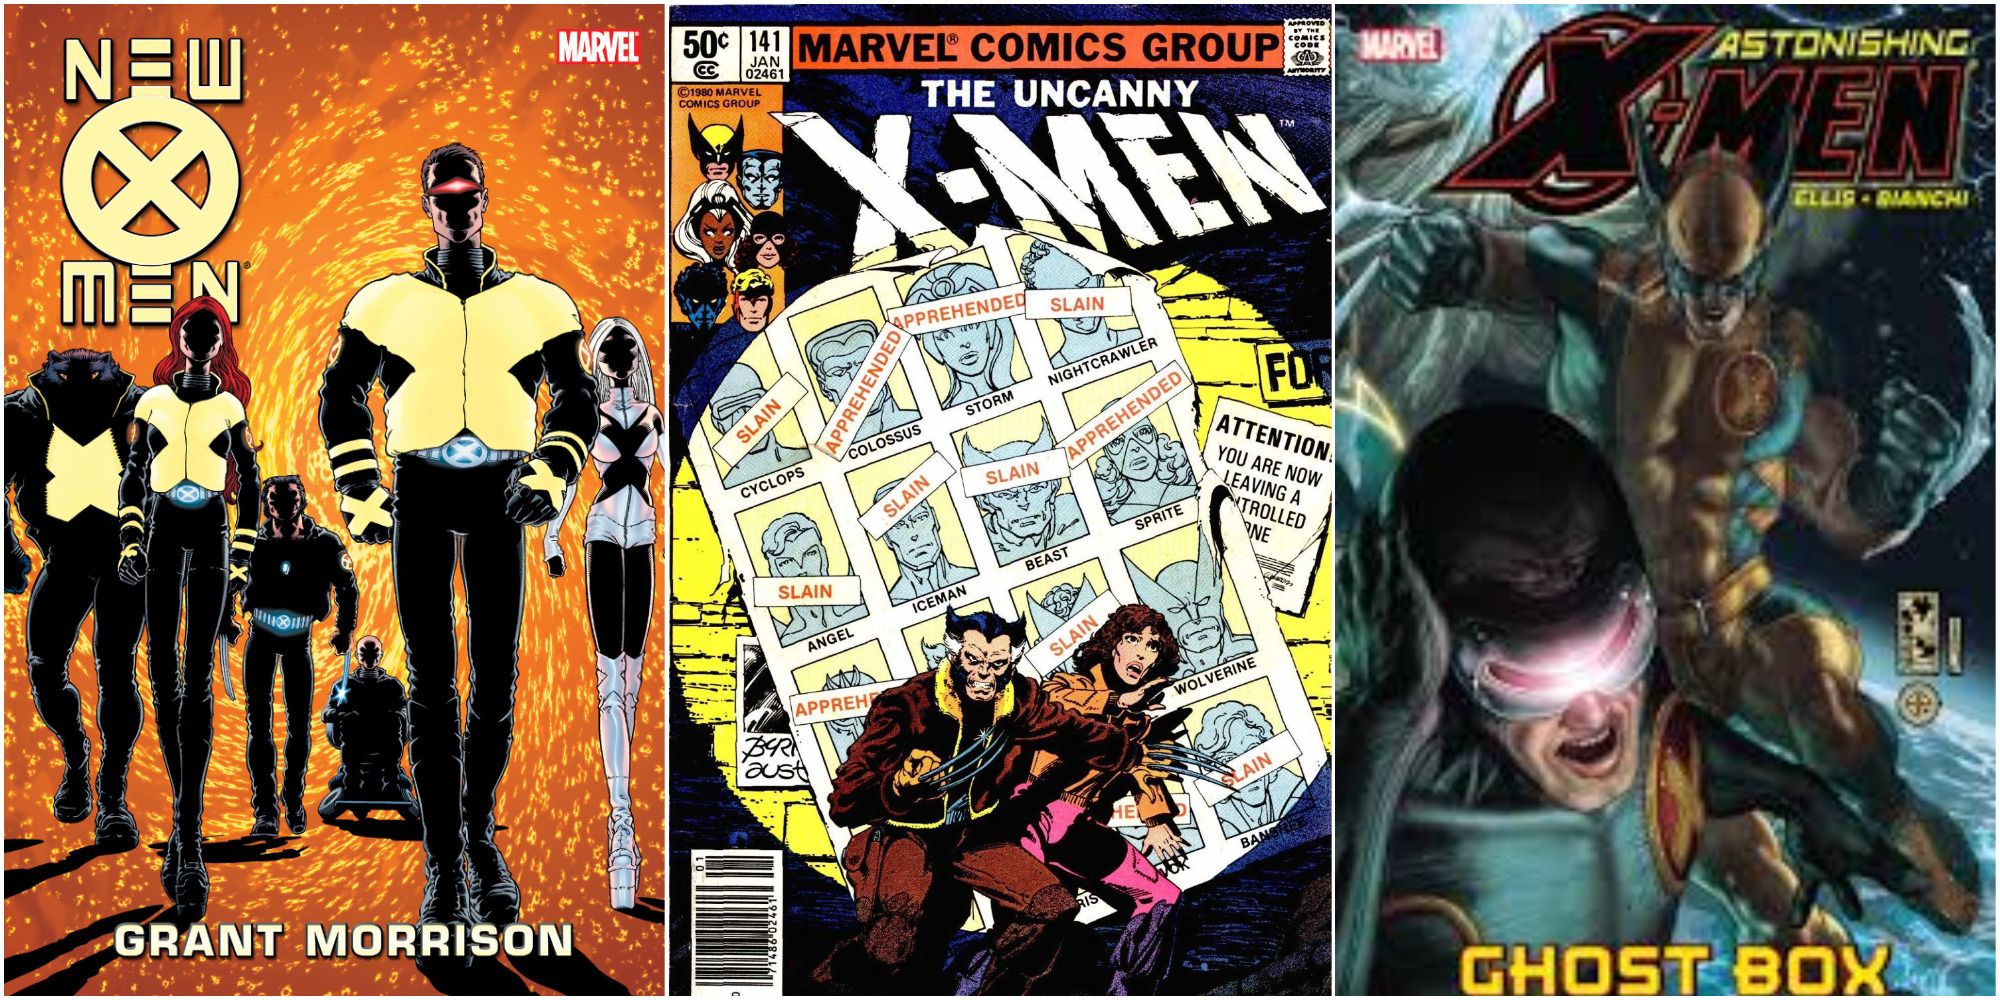 E Is For Extinction, Days Of Future Past, and Ghost Box